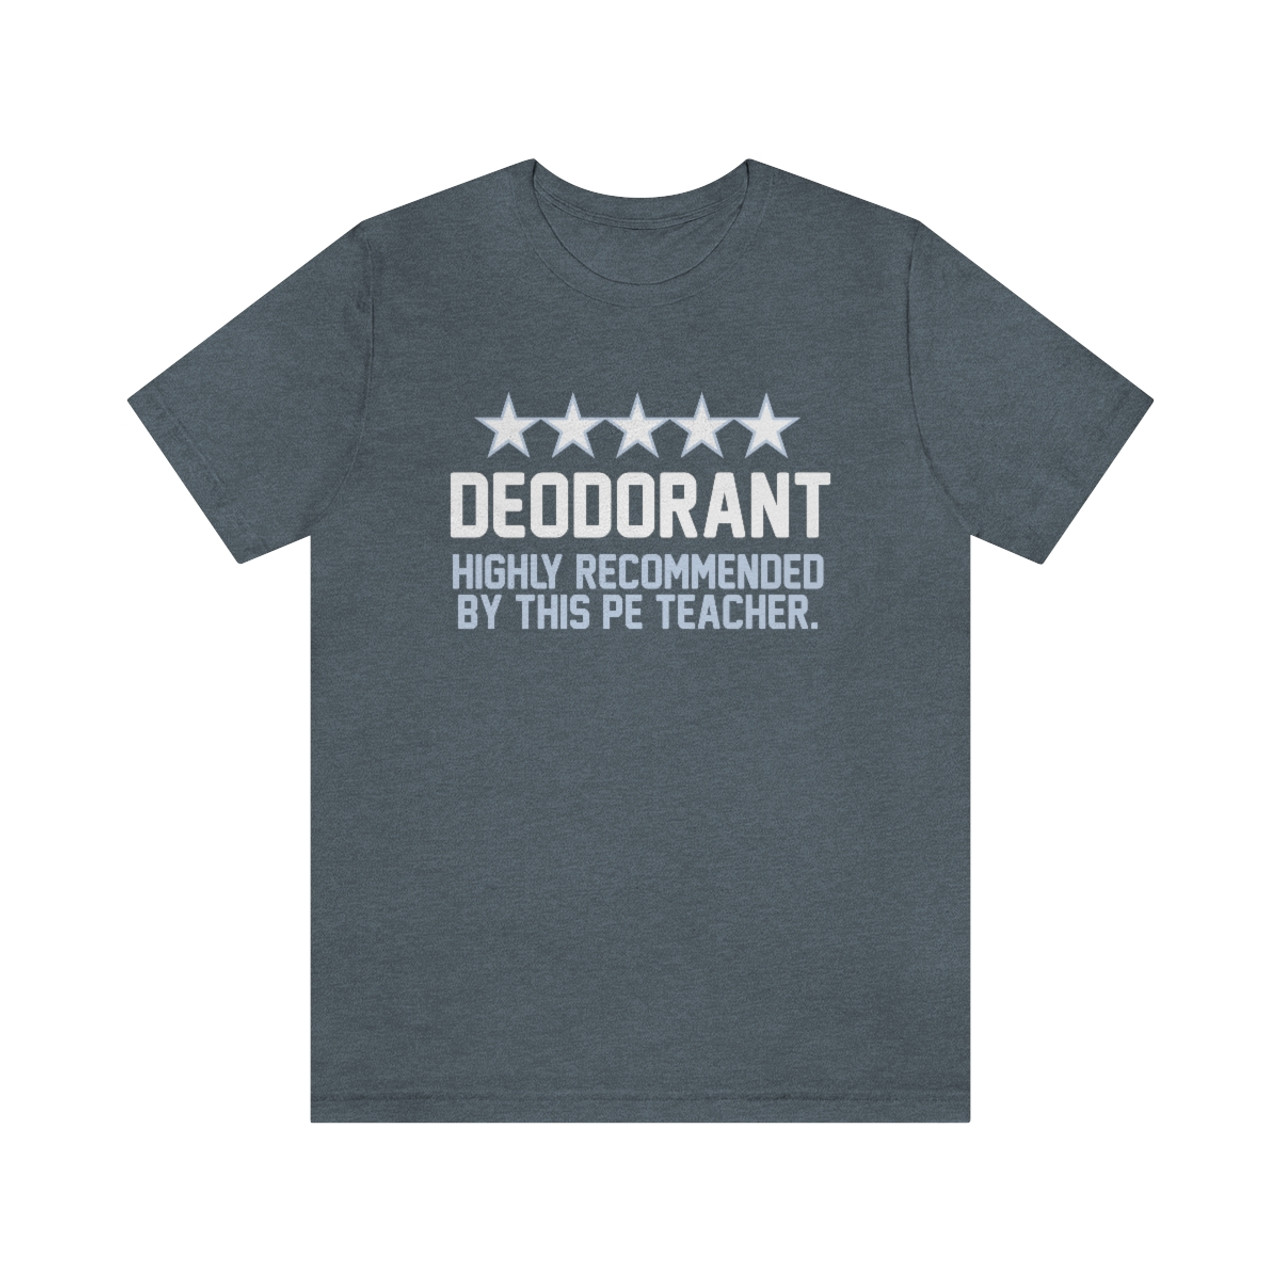 "Deodorant Highly Recommended" T-Shirt